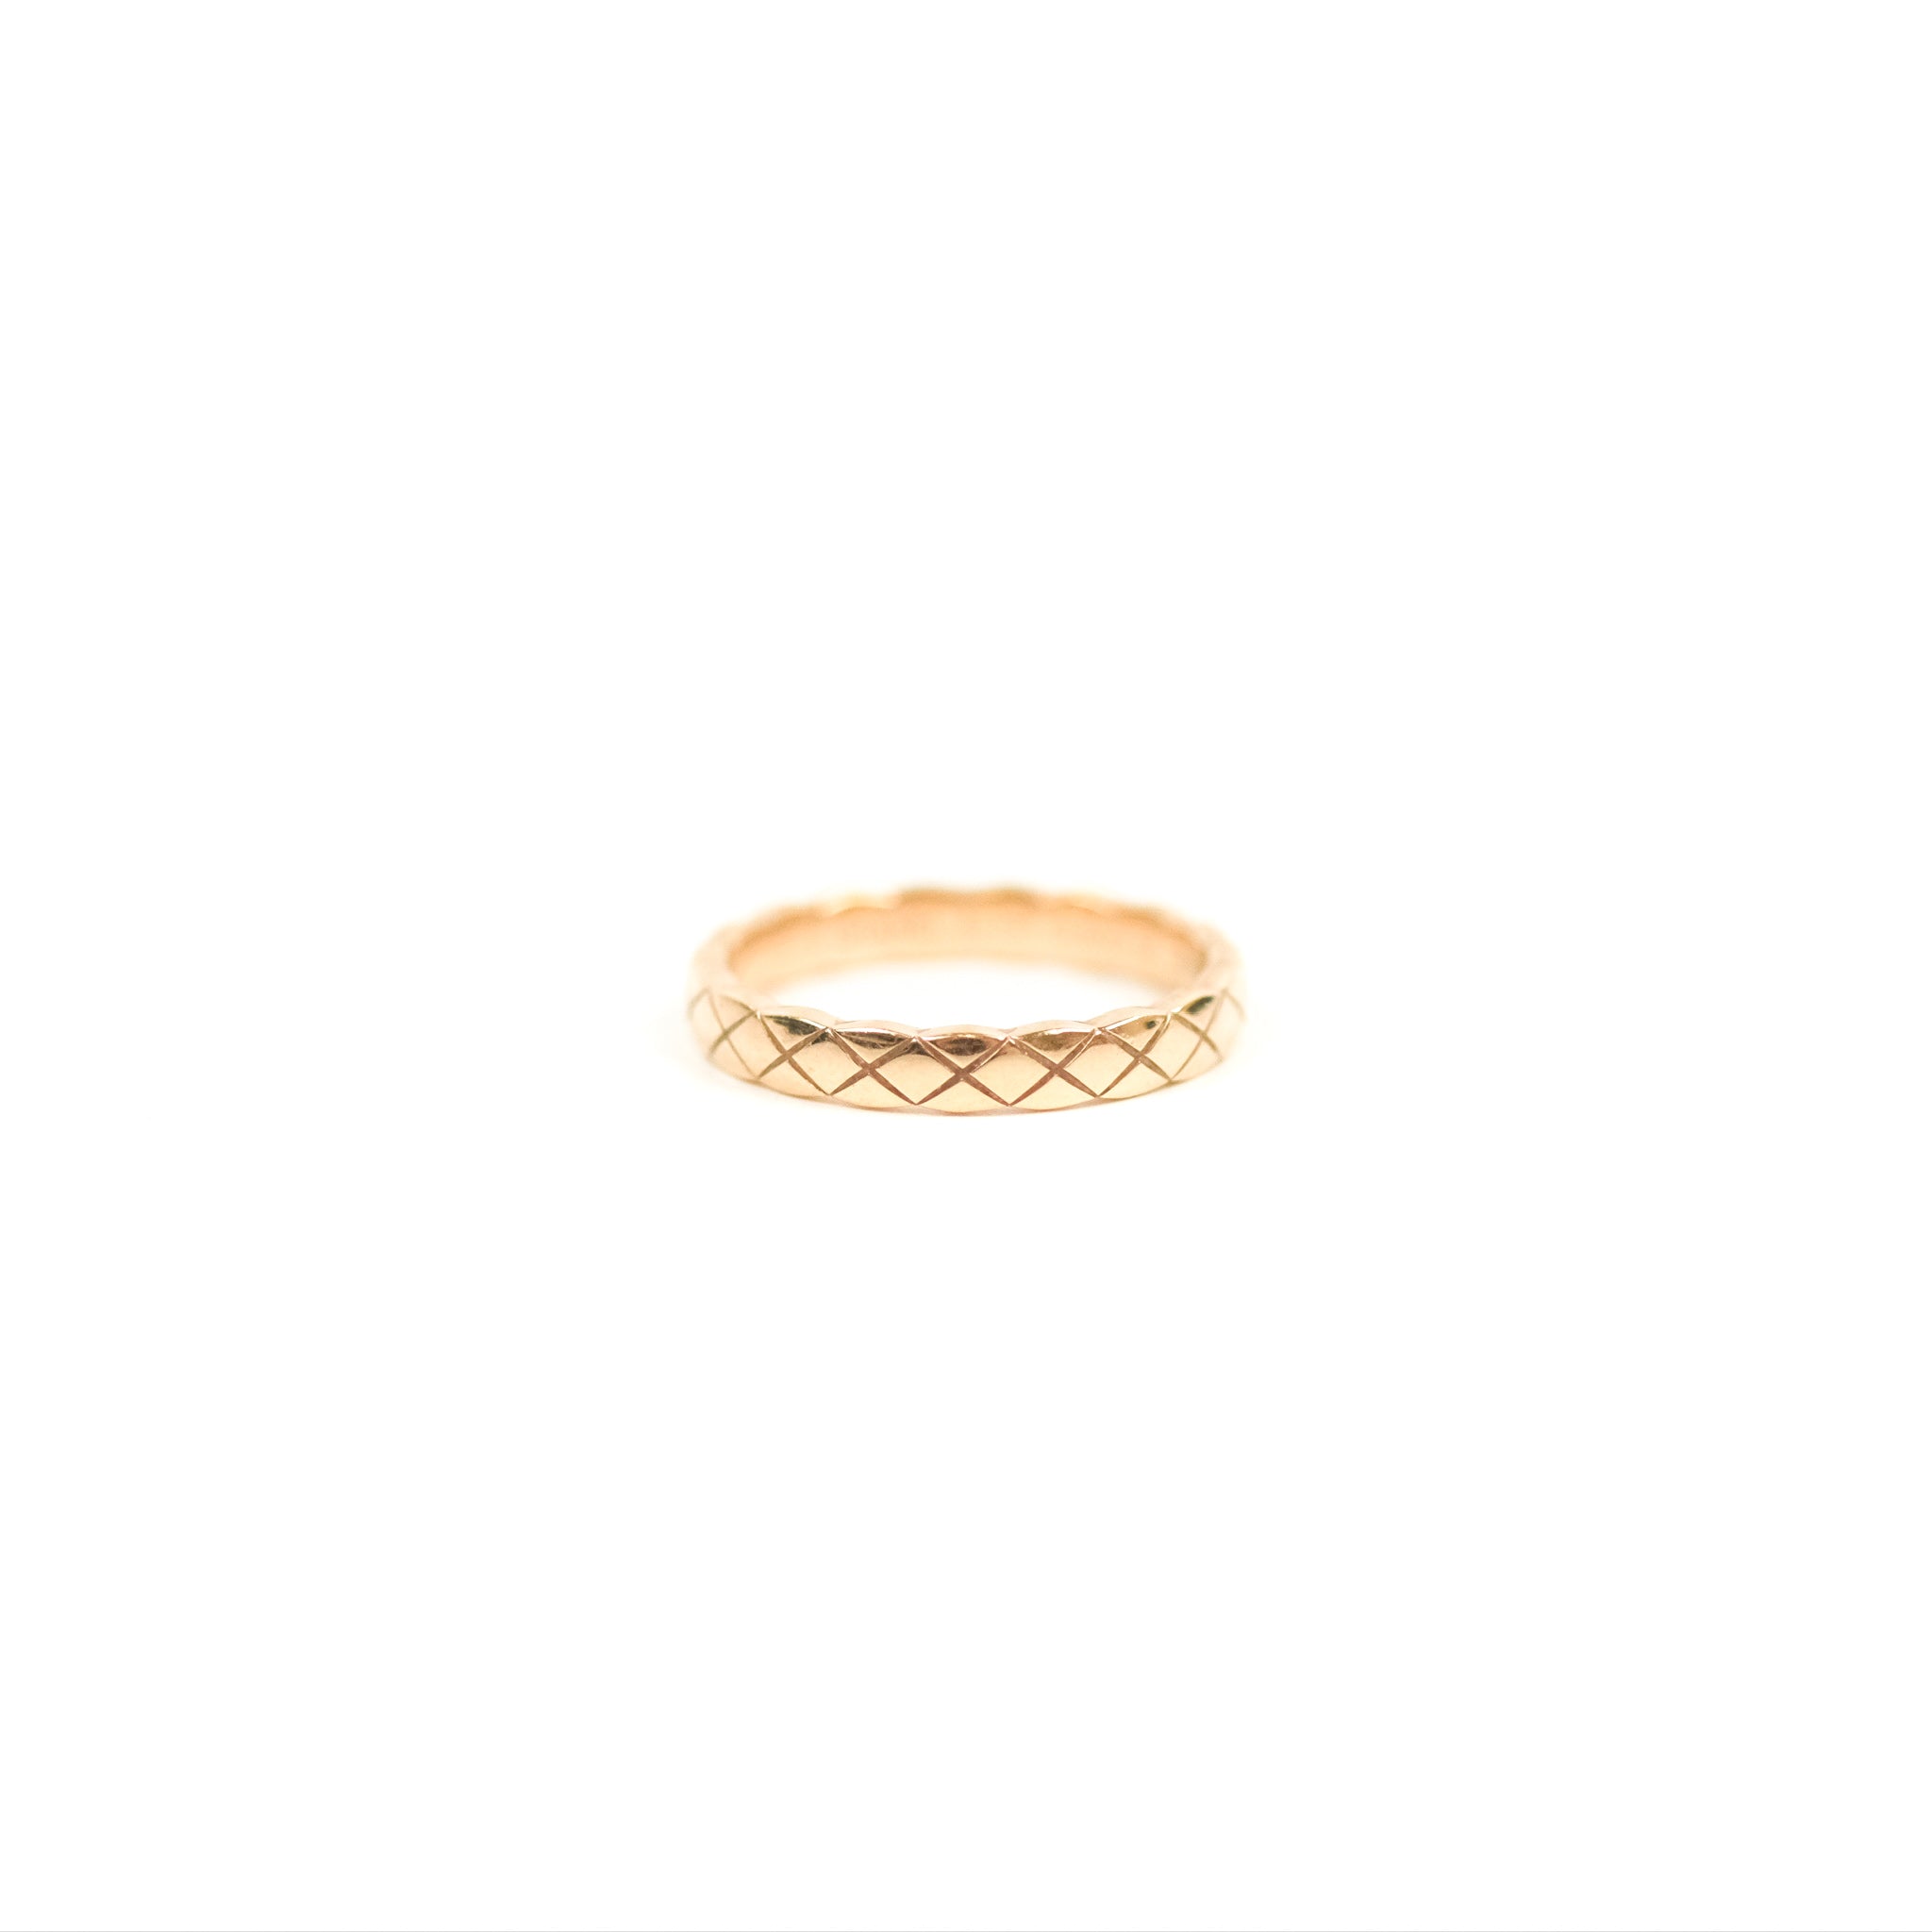 Chanel Coco Crush 18k White Gold Quilted Diamond Ring